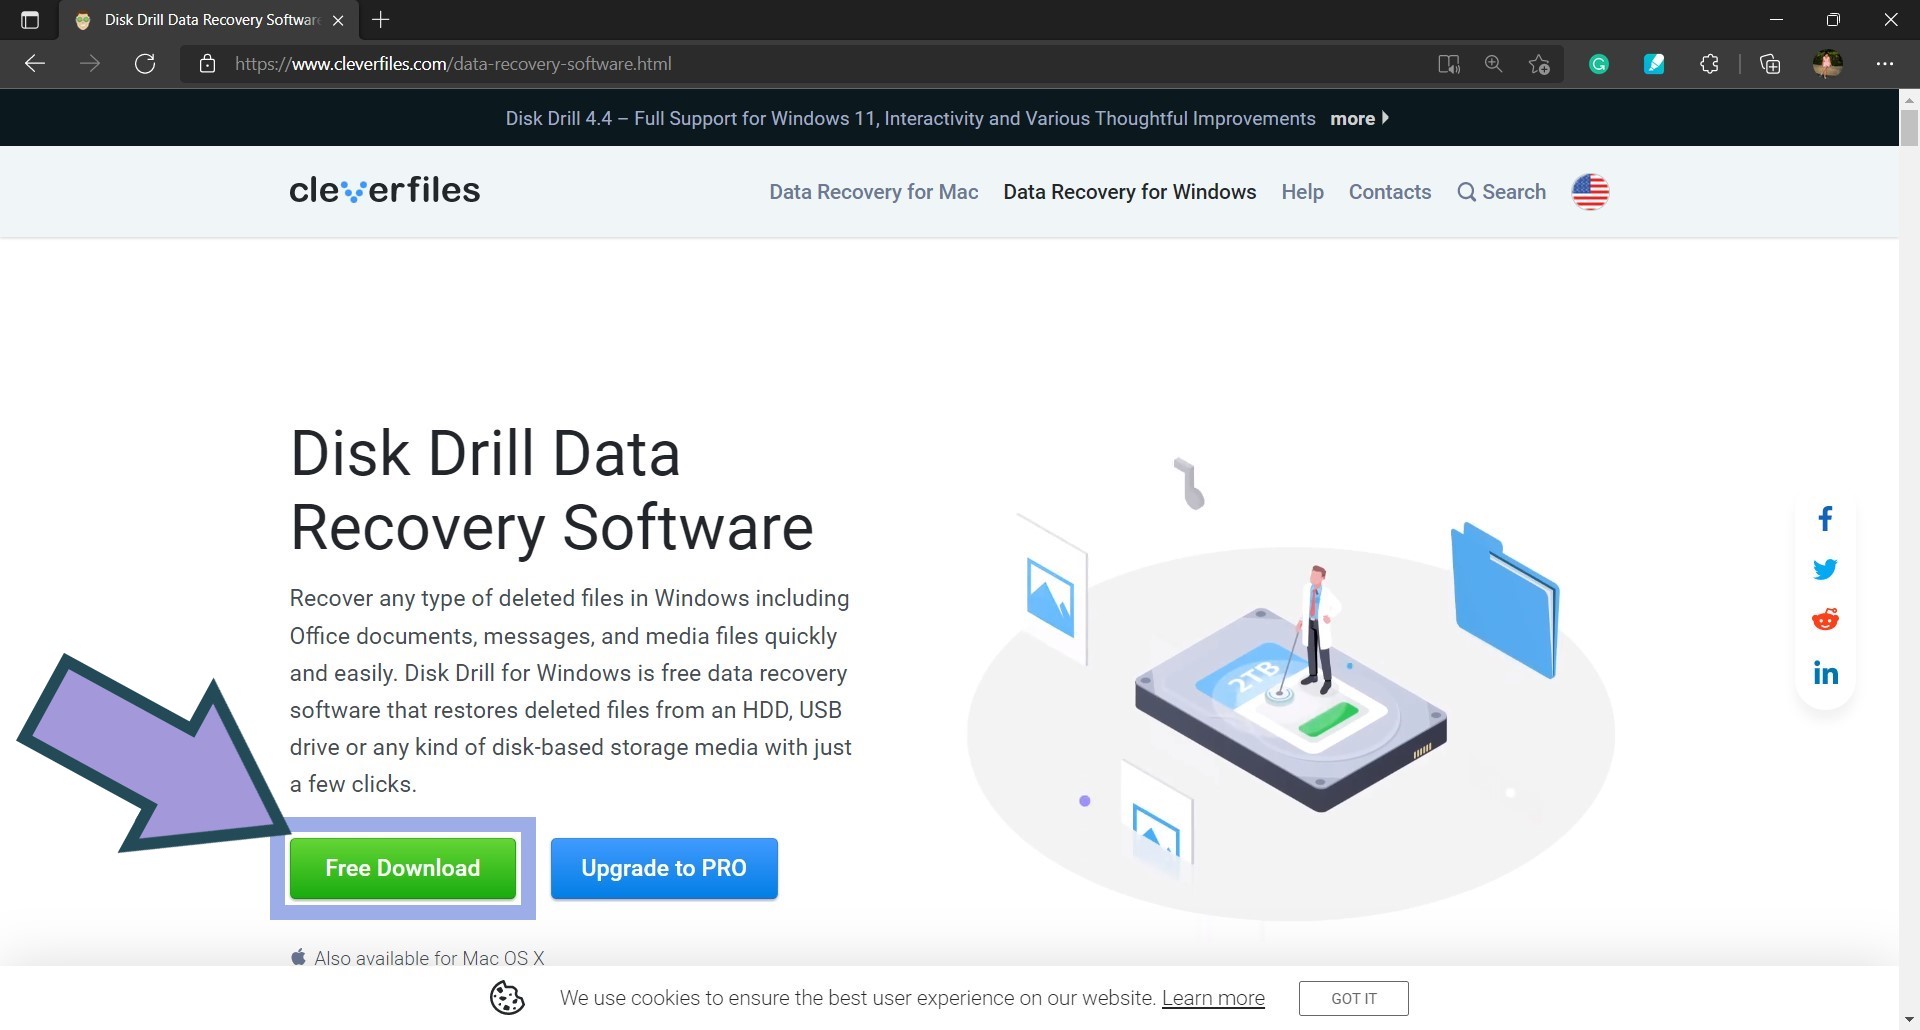 Download Disk Drill for Windows